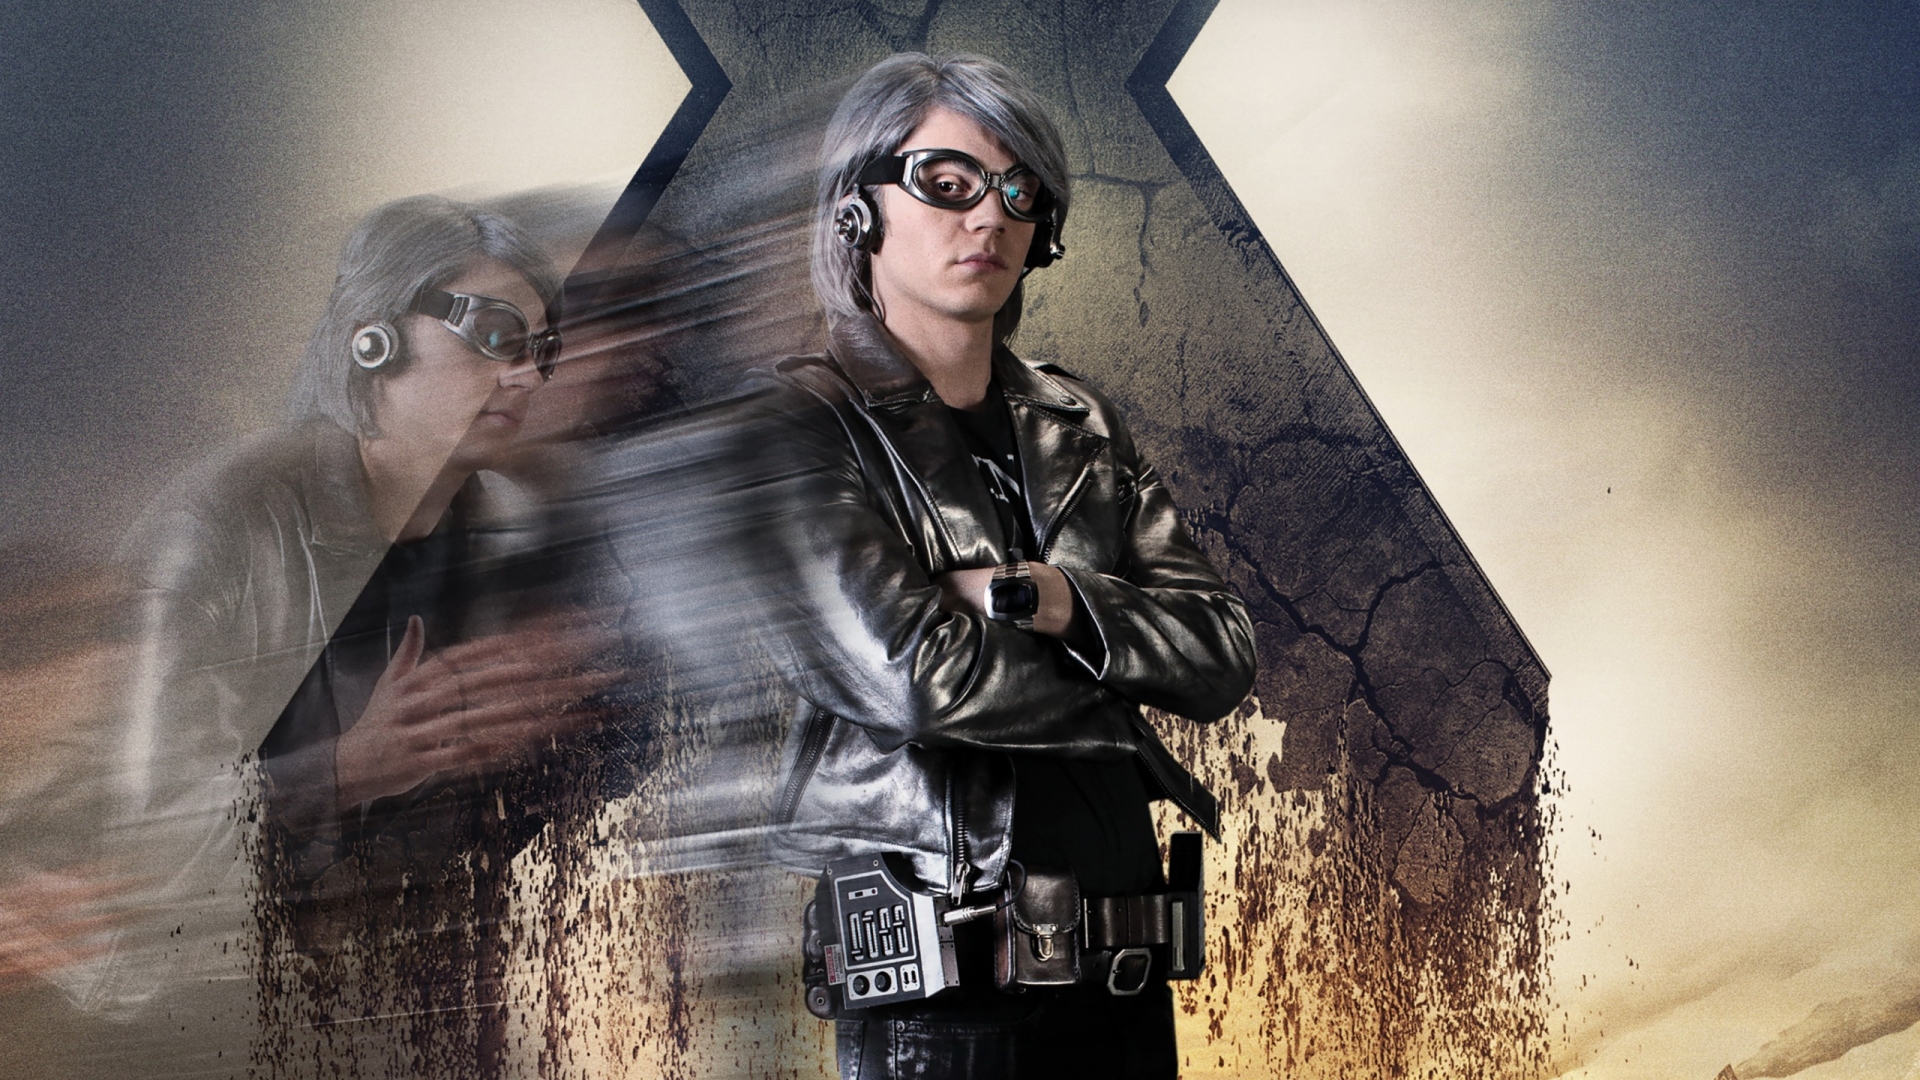 2014 X-Men Days of Future Past for 1920 x 1080 HDTV 1080p resolution